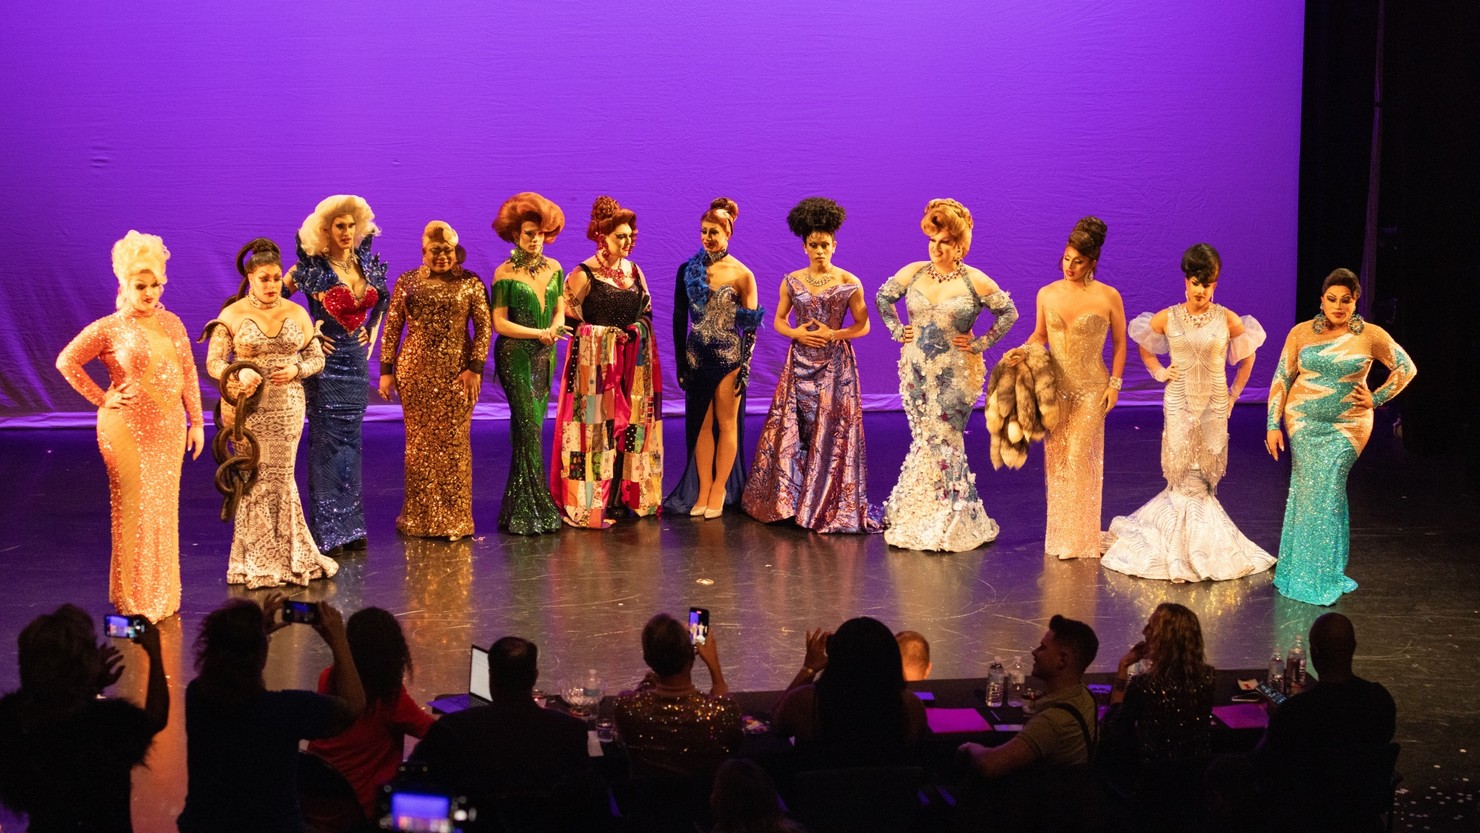 A group of drag queens standing on a stage in their fanciest eveningwear.